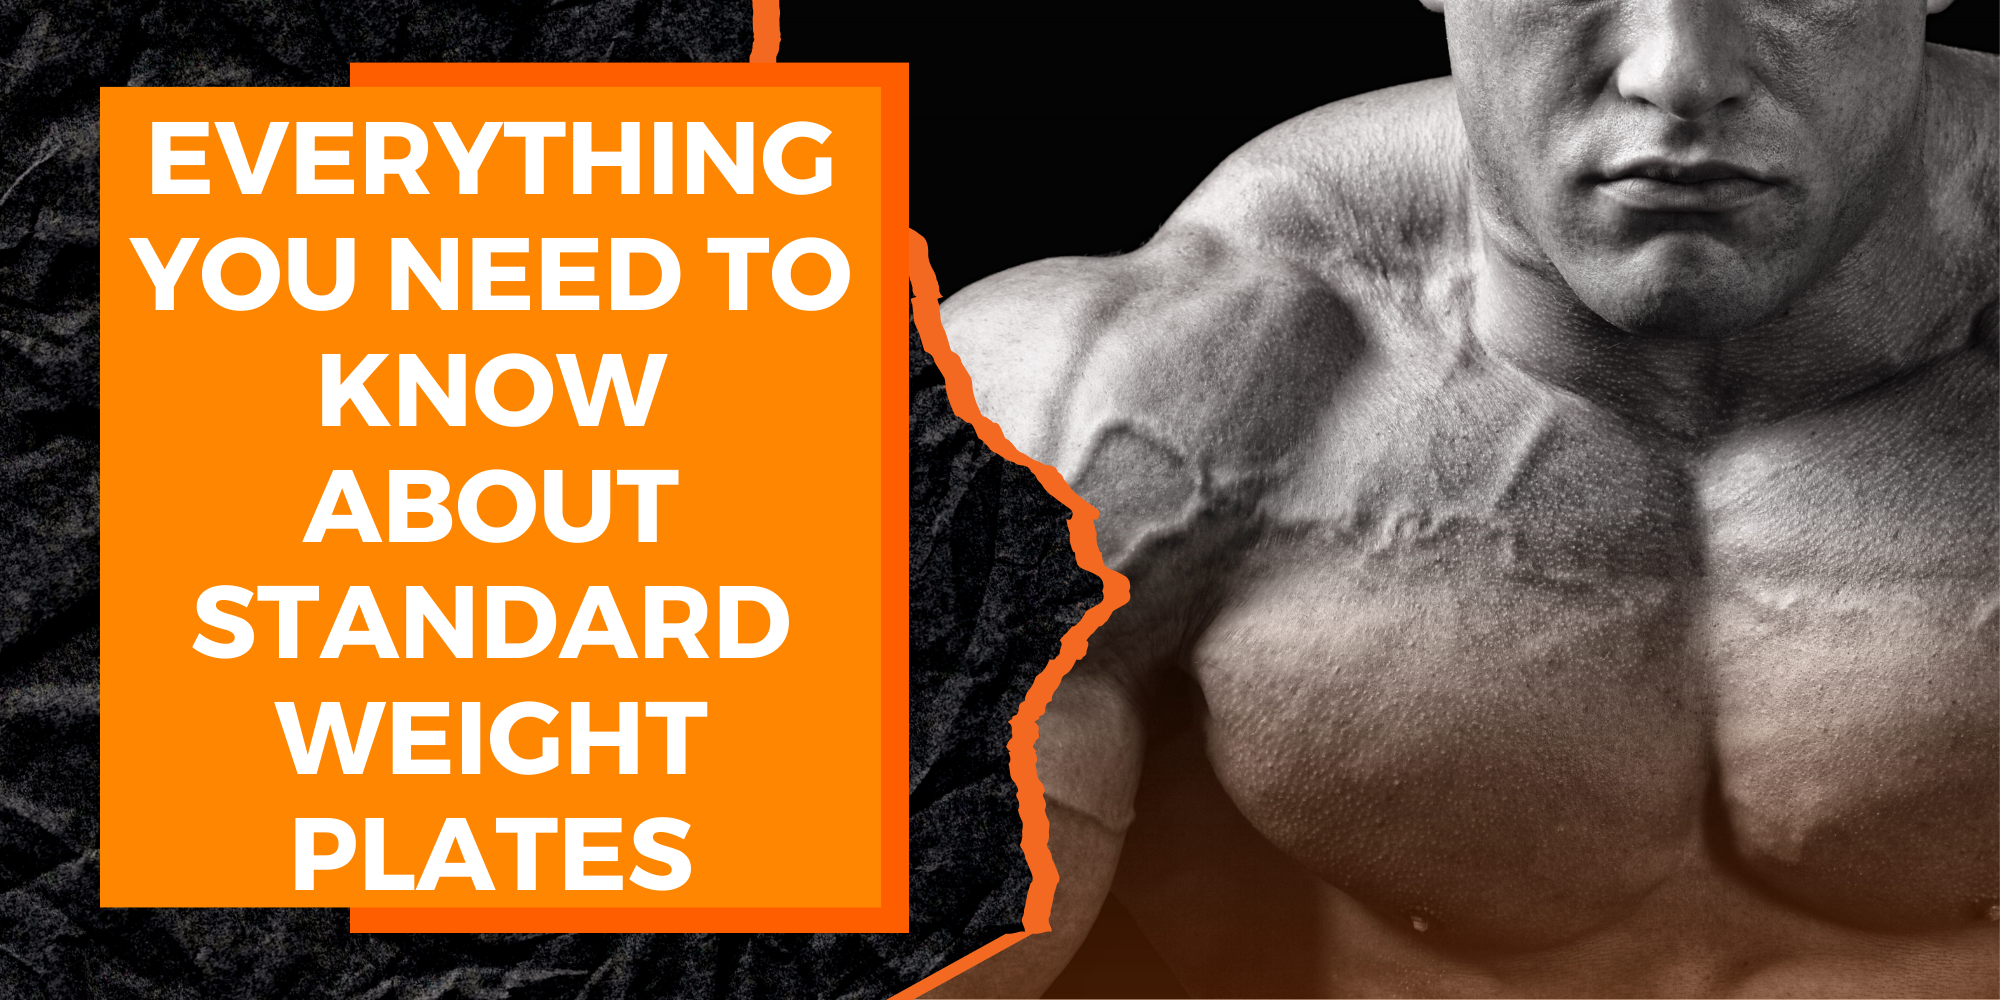 Everything You Need to Know About Standard Weight Plates